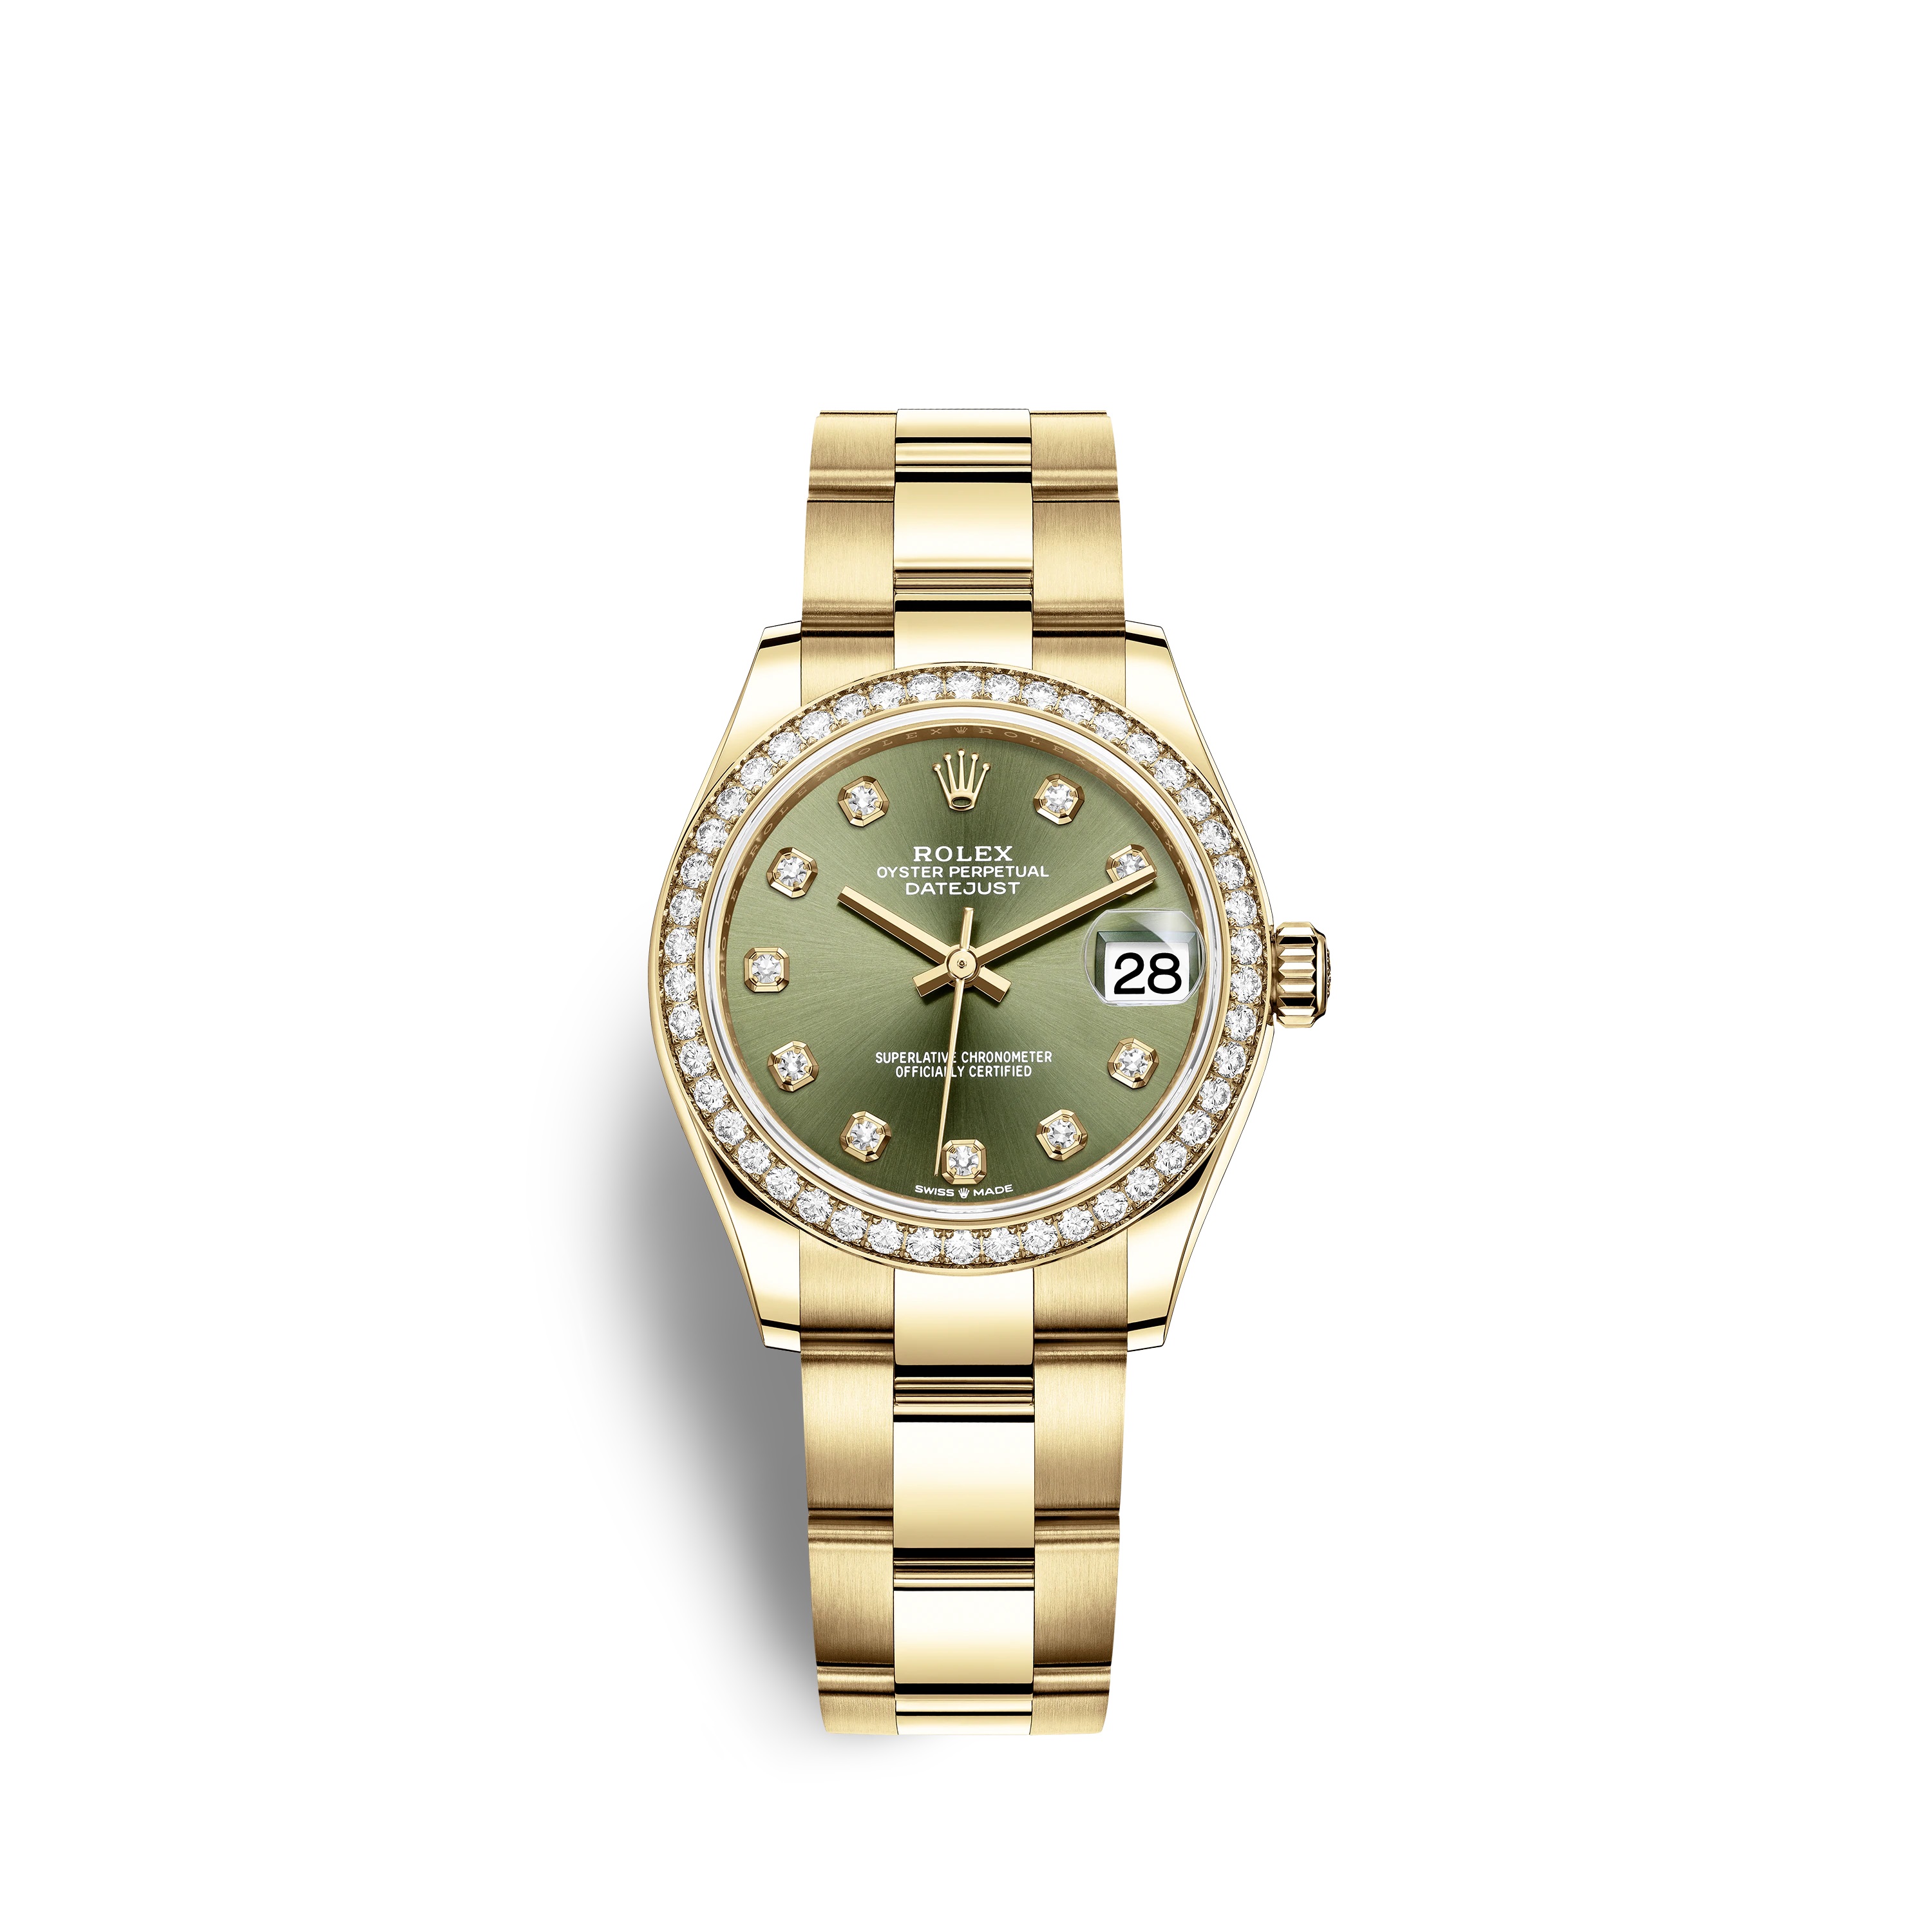 Datejust 31 278288RBR Gold Watch (Olive Green Set with Diamonds)